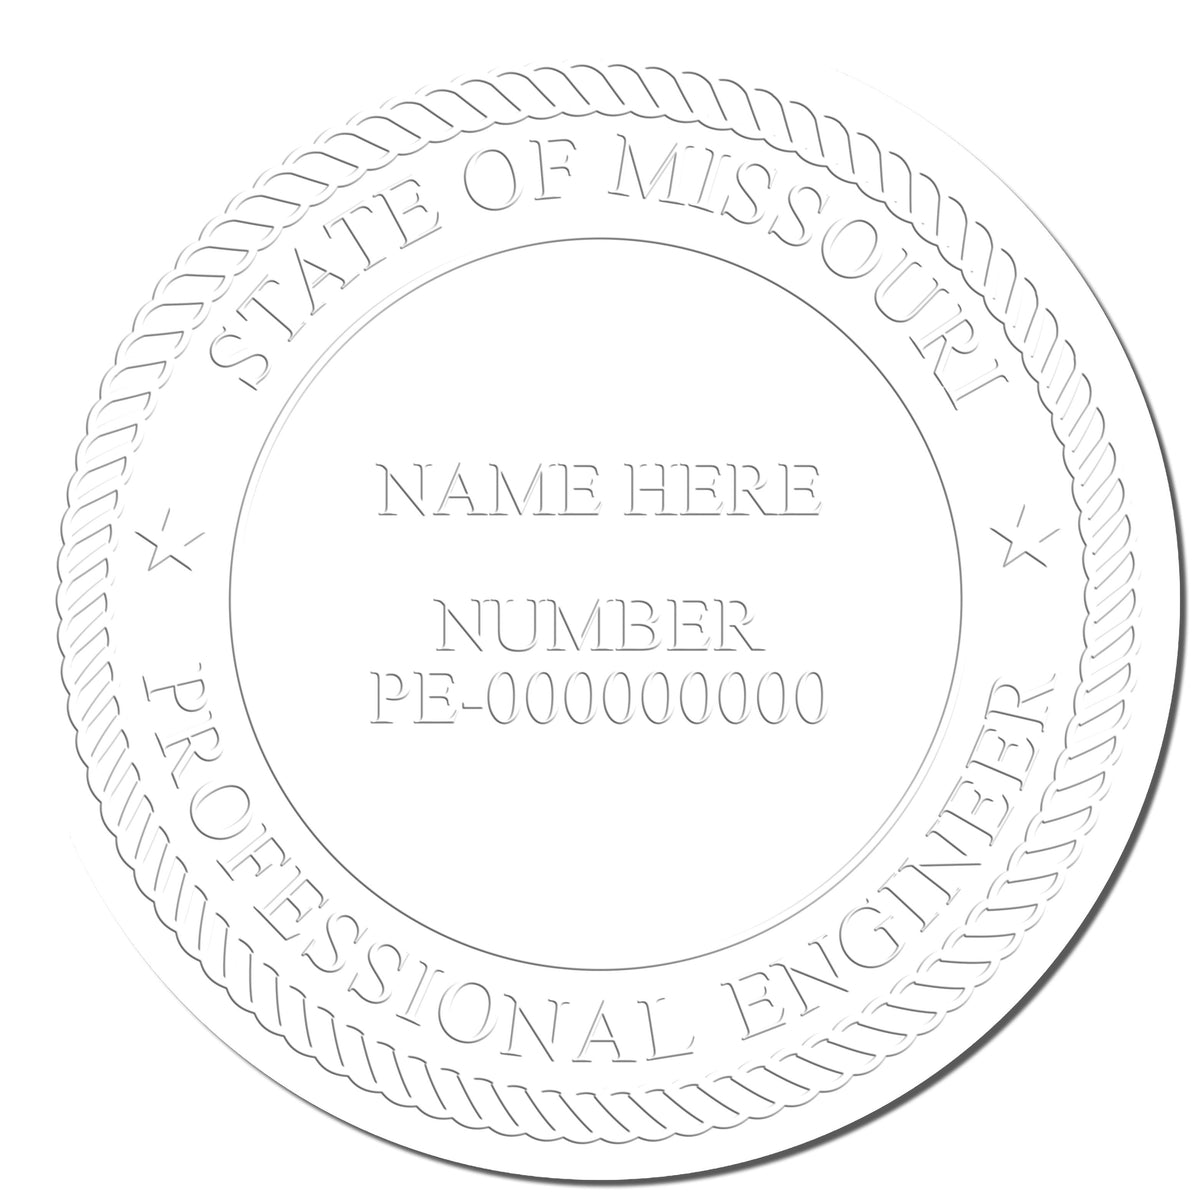 This paper is stamped with a sample imprint of the Gift Missouri Engineer Seal, signifying its quality and reliability.